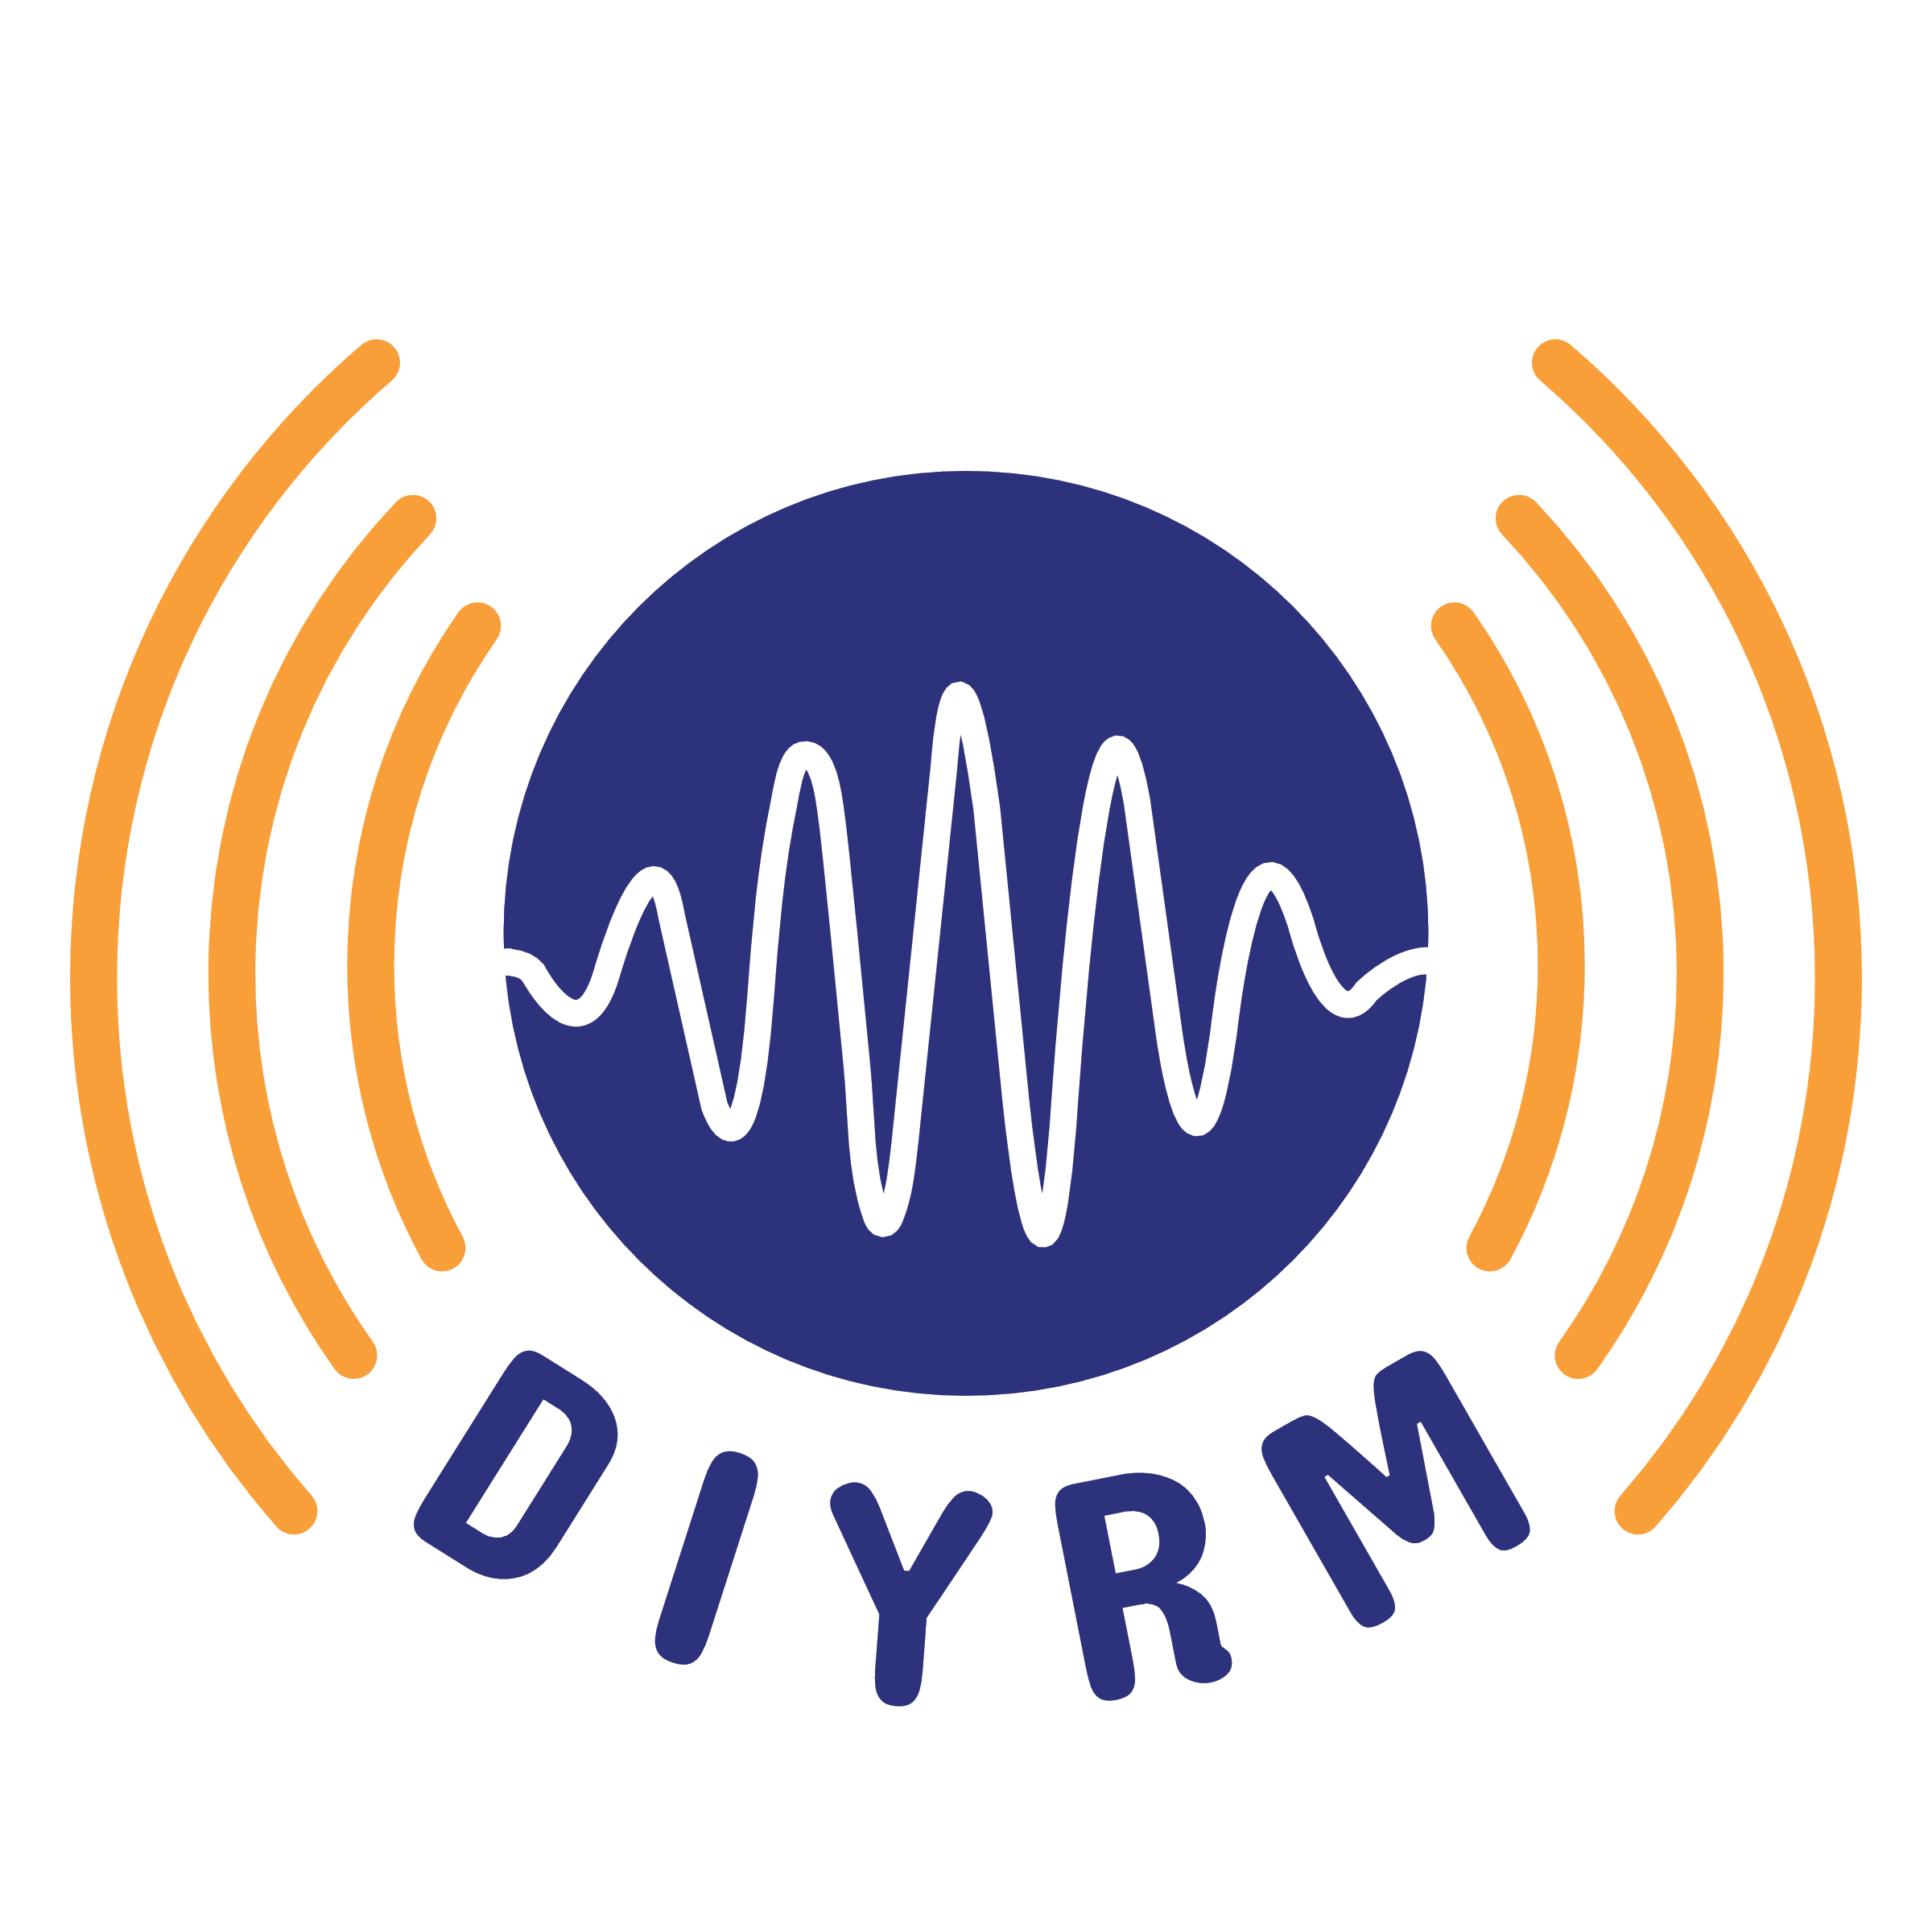 DIYM Logo. A blue circle with audio curve in the center. Surrounded by yellow arcs.